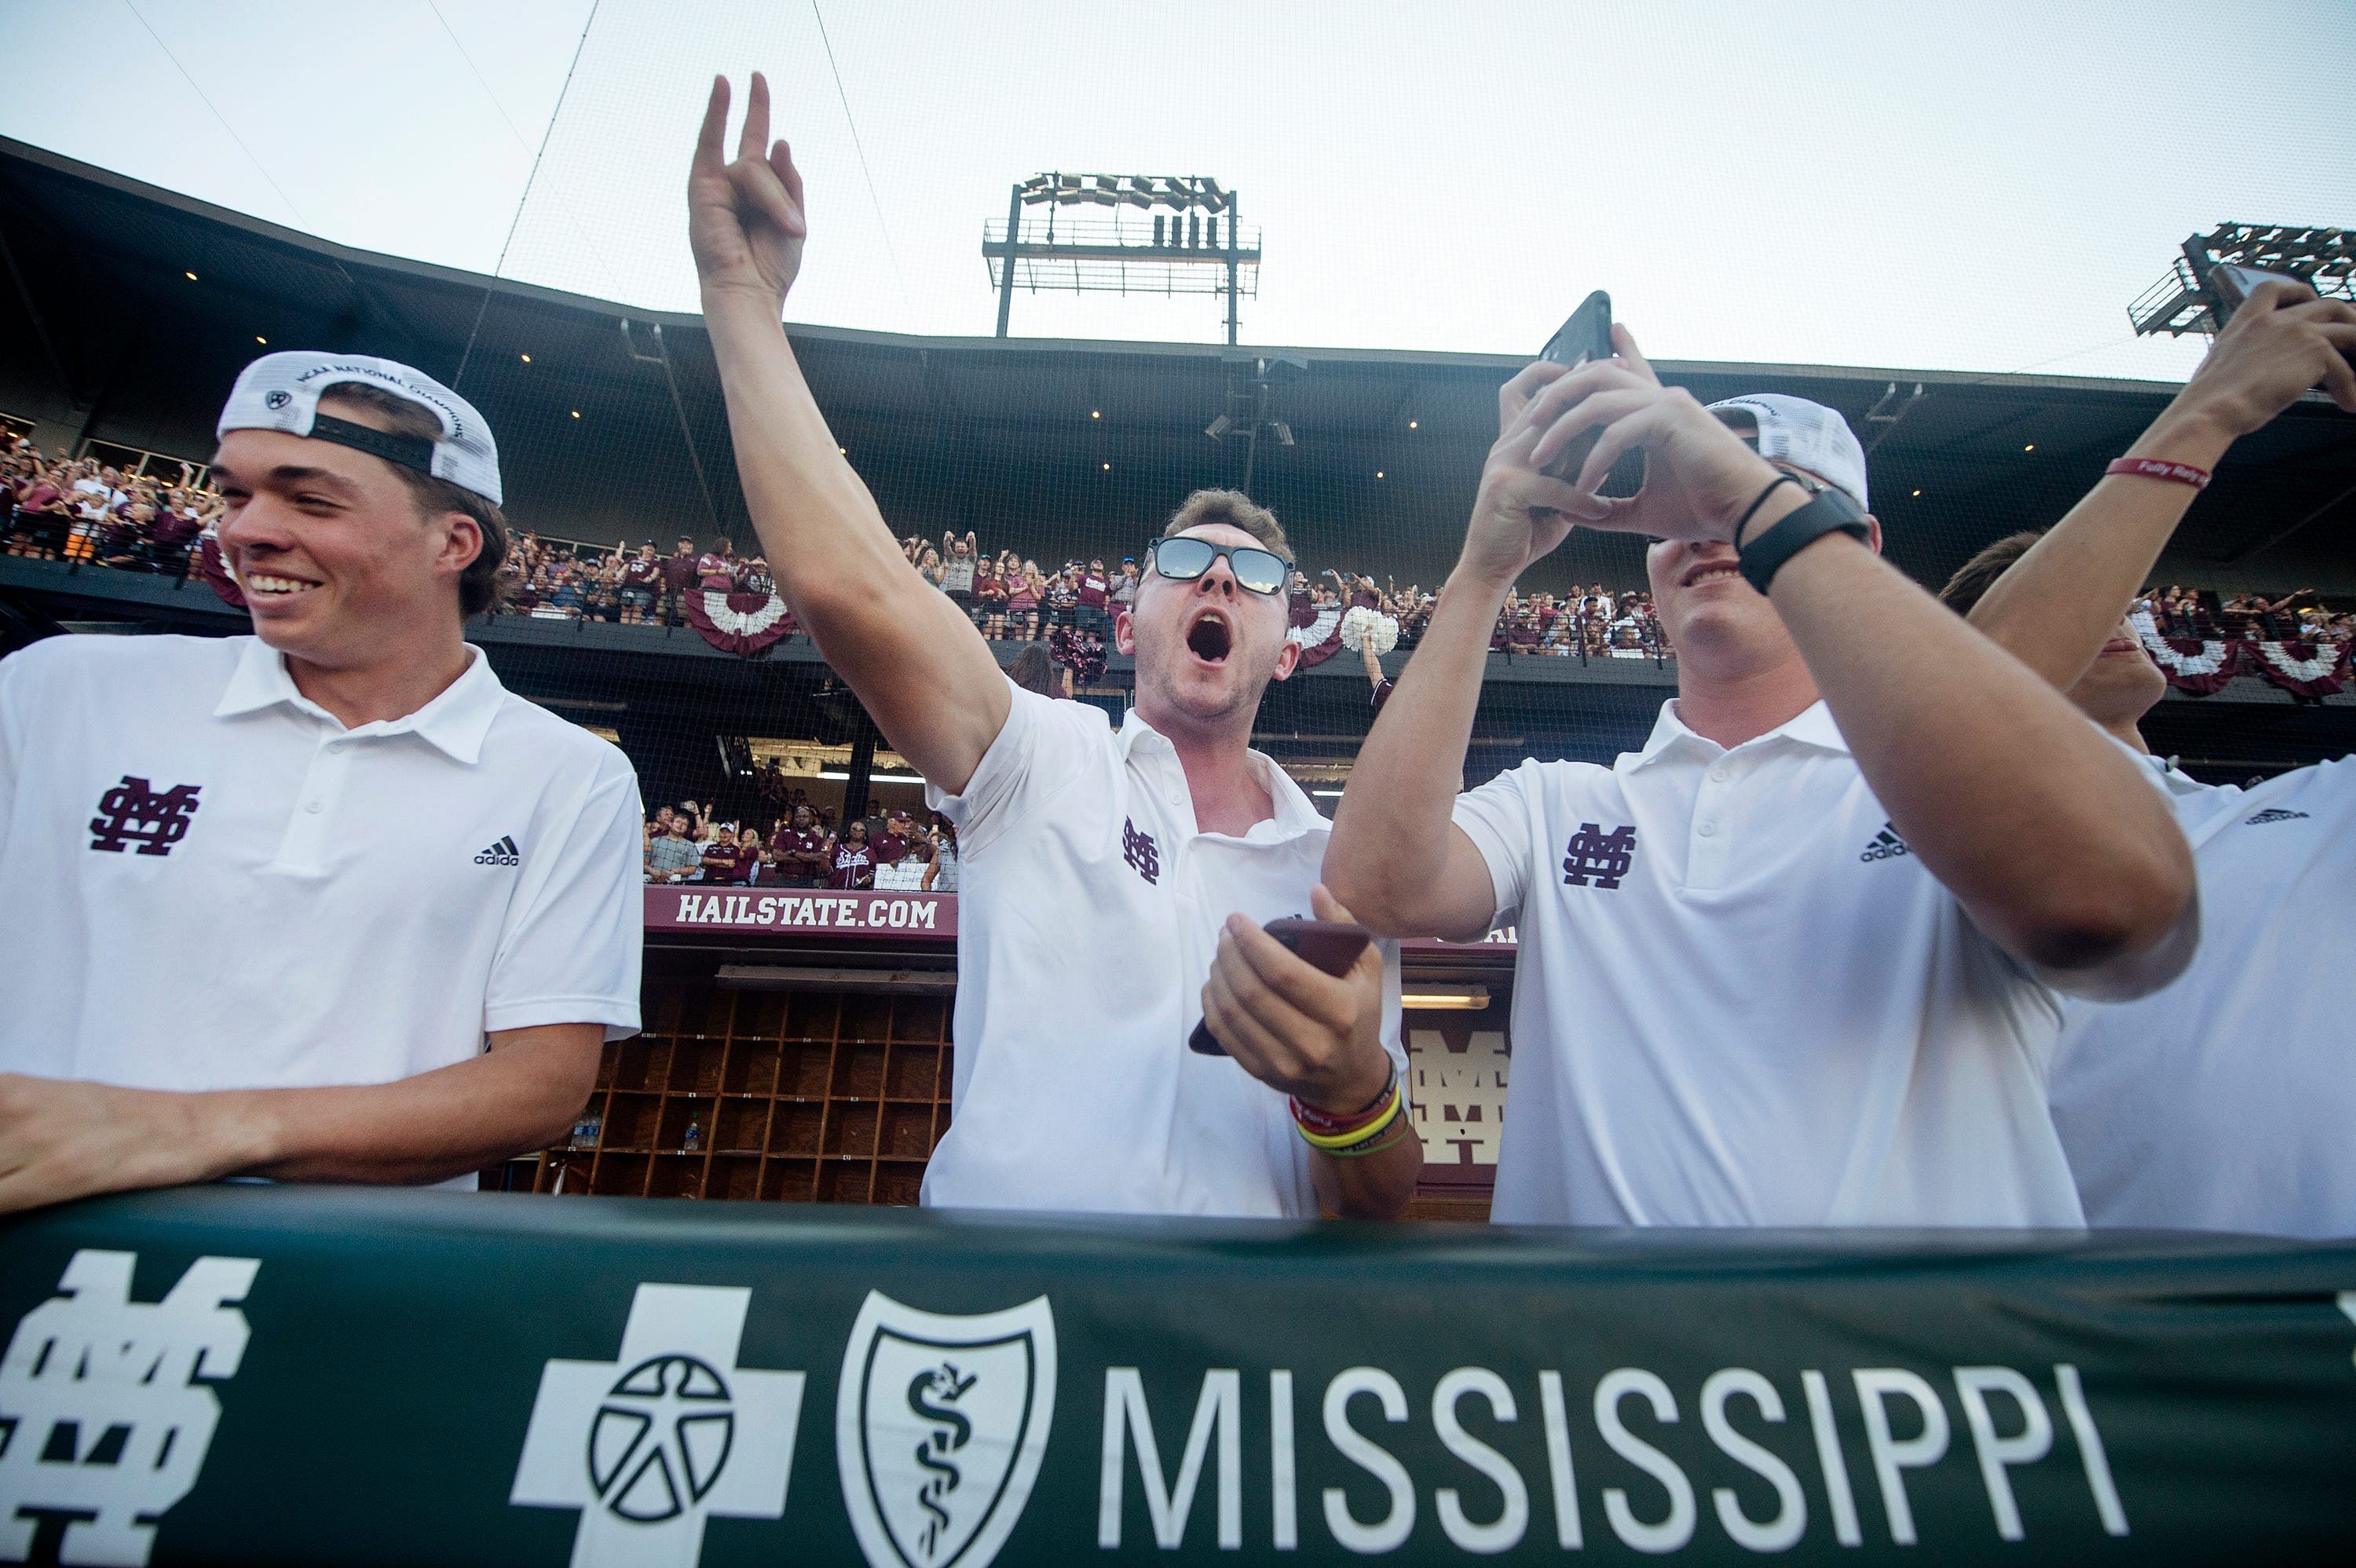 Mississippi State partisans are part of what makes Dudy Noble Field a top college baseball venue.